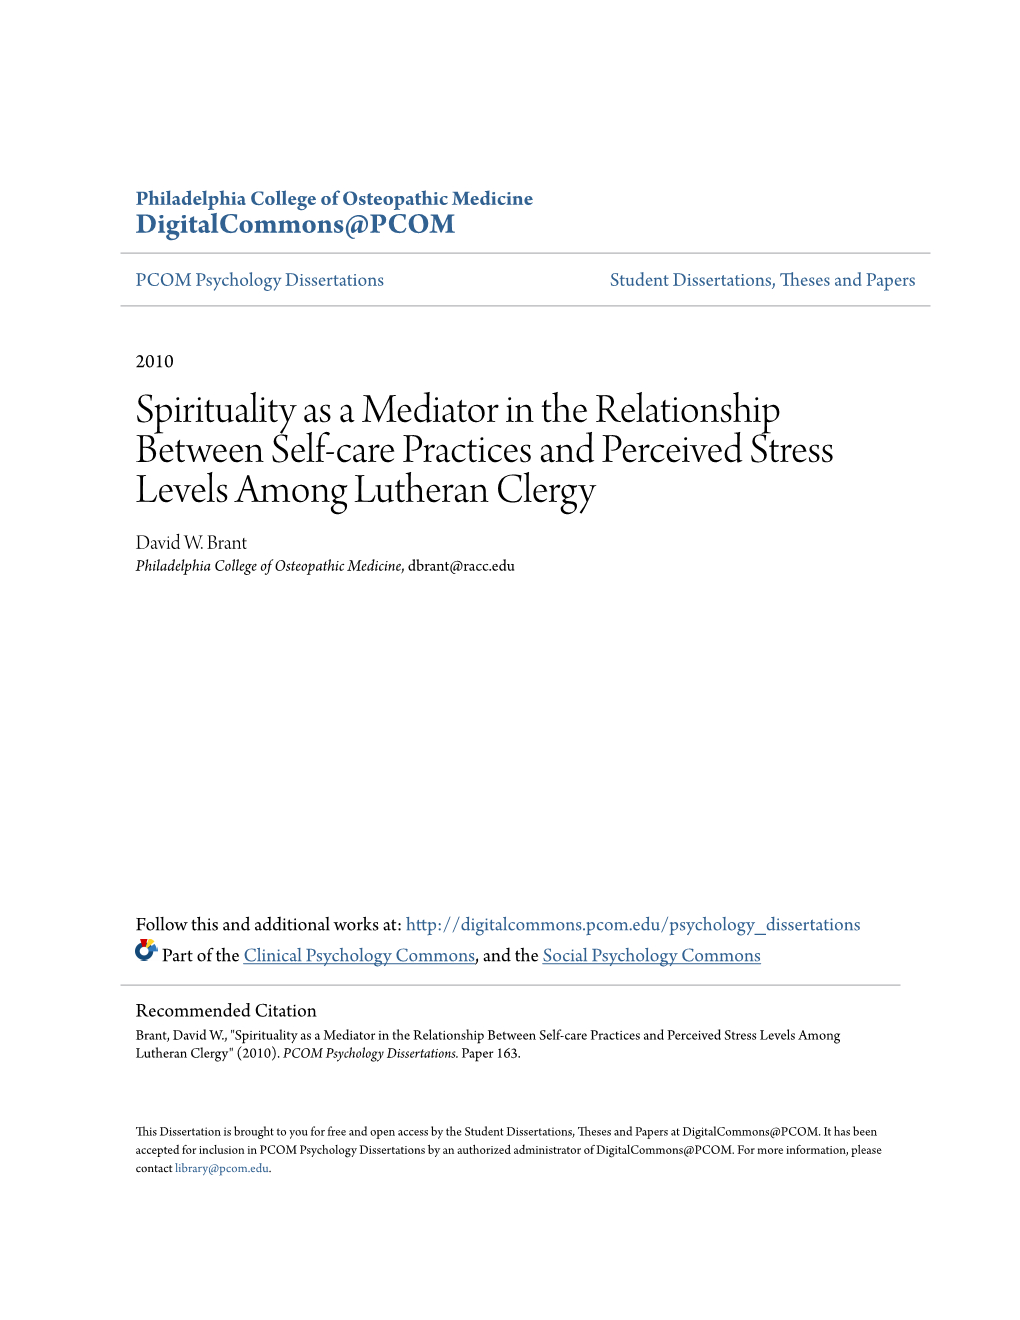 Spirituality As a Mediator in the Relationship Between Self-Care Practices and Perceived Stress Levels Among Lutheran Clergy David W